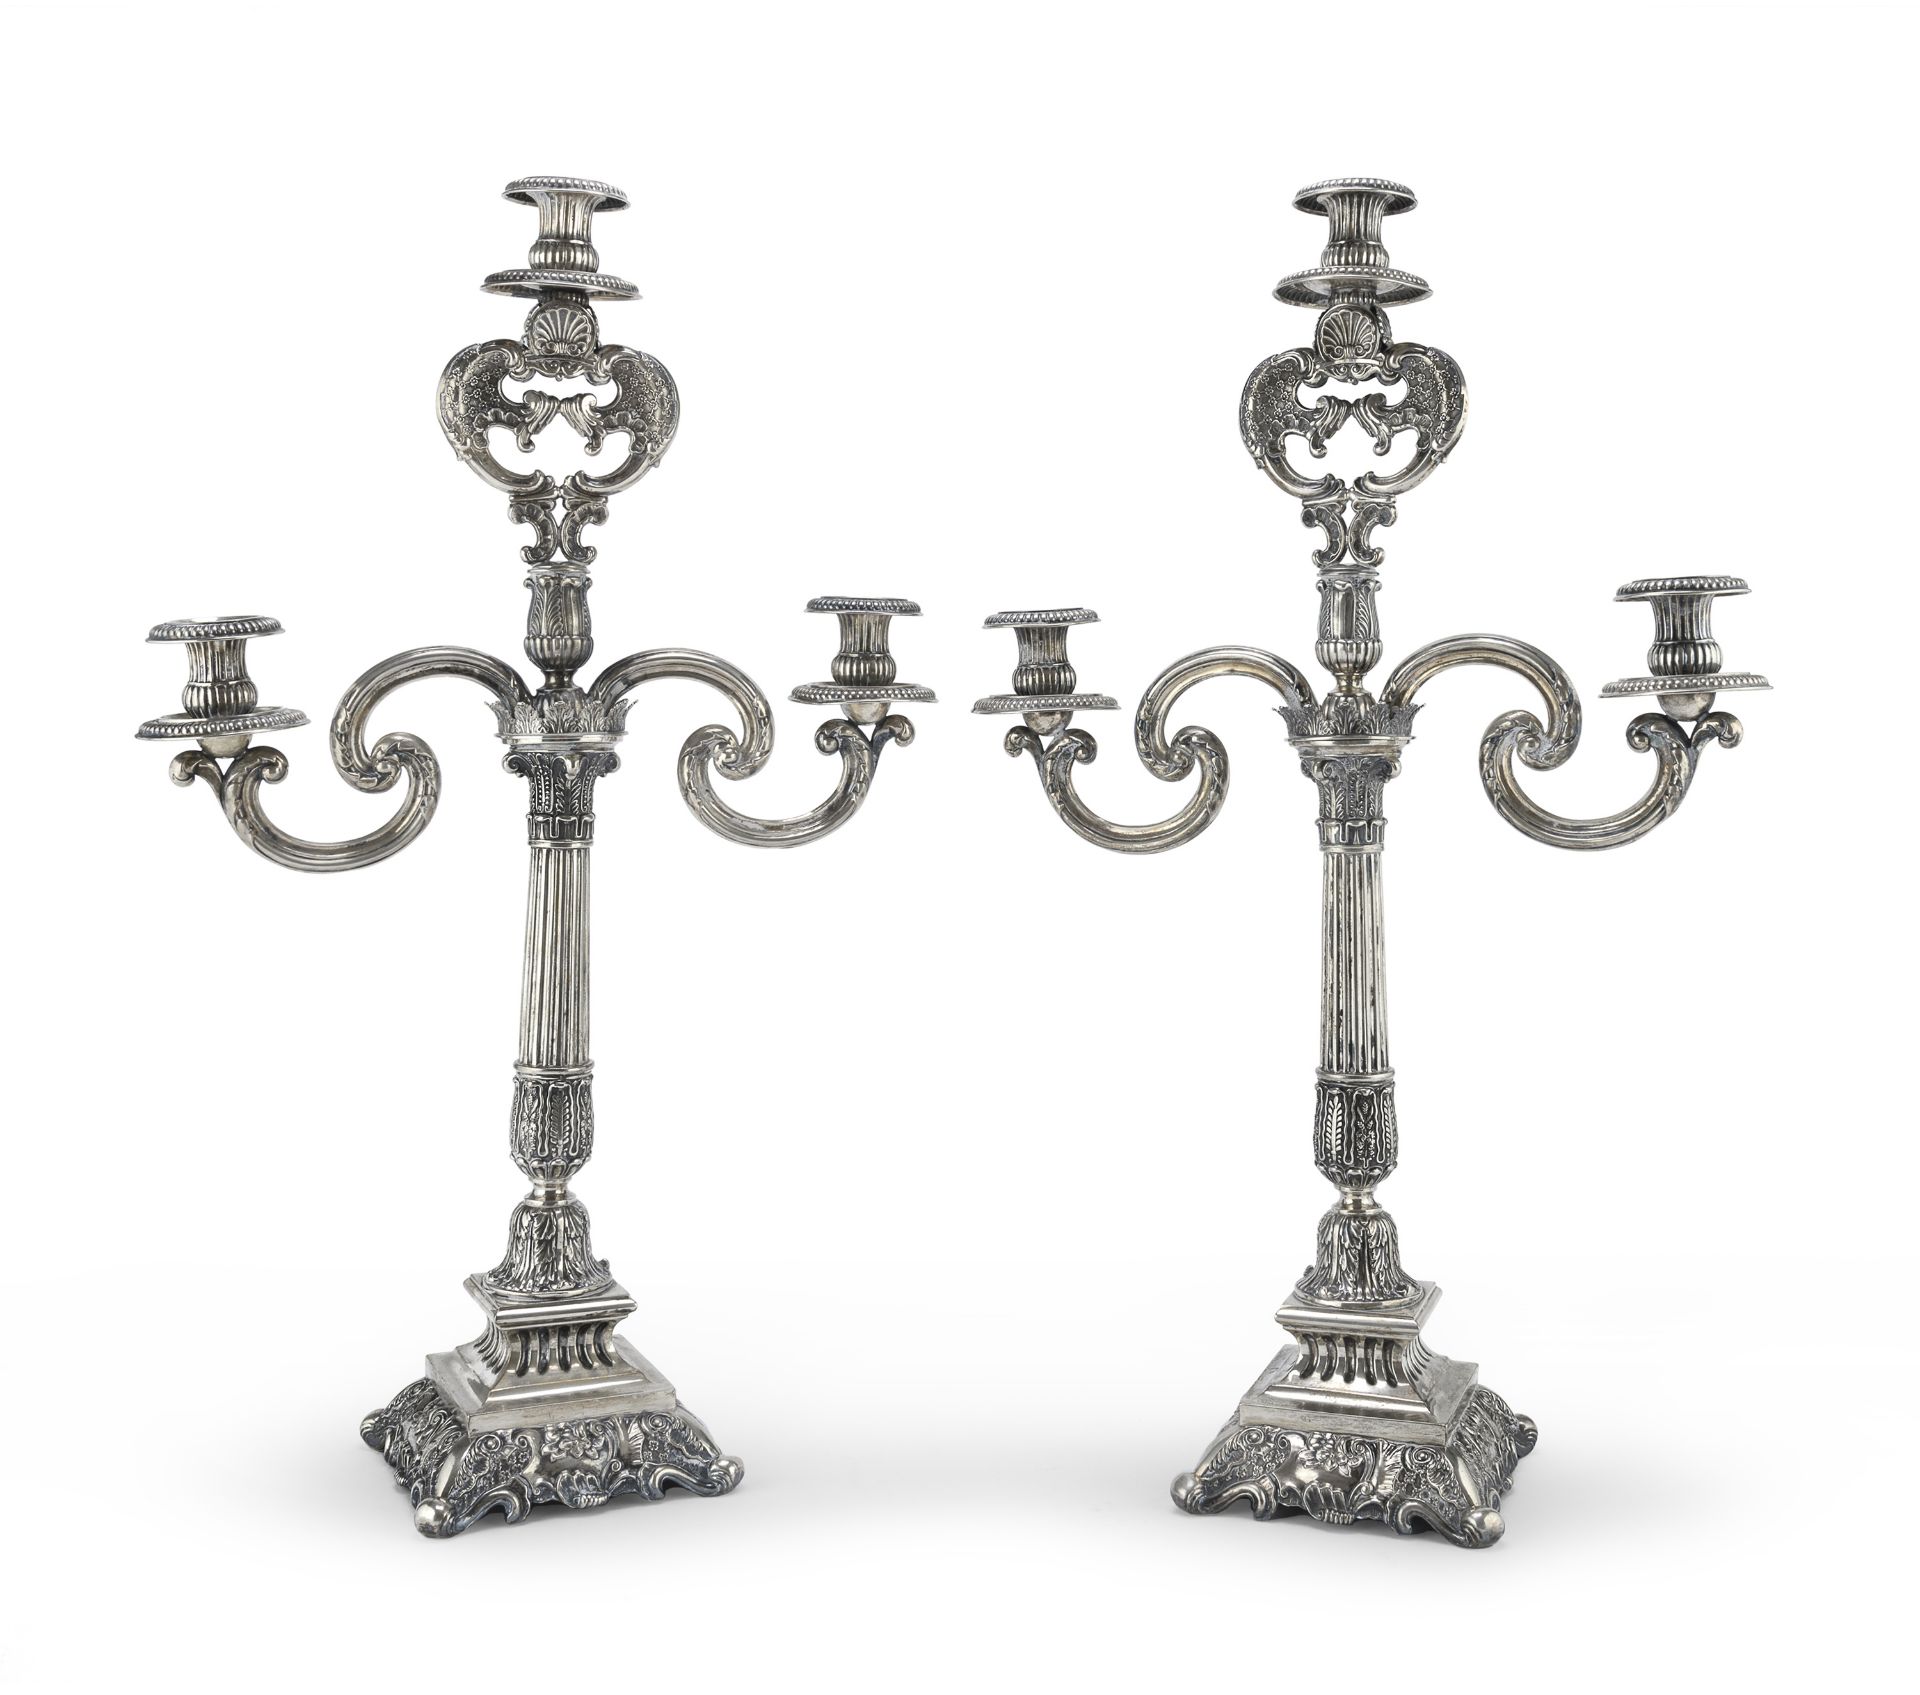 PAIR OF SILVER CANDLESTICKS GERMANY 18th CENTURY